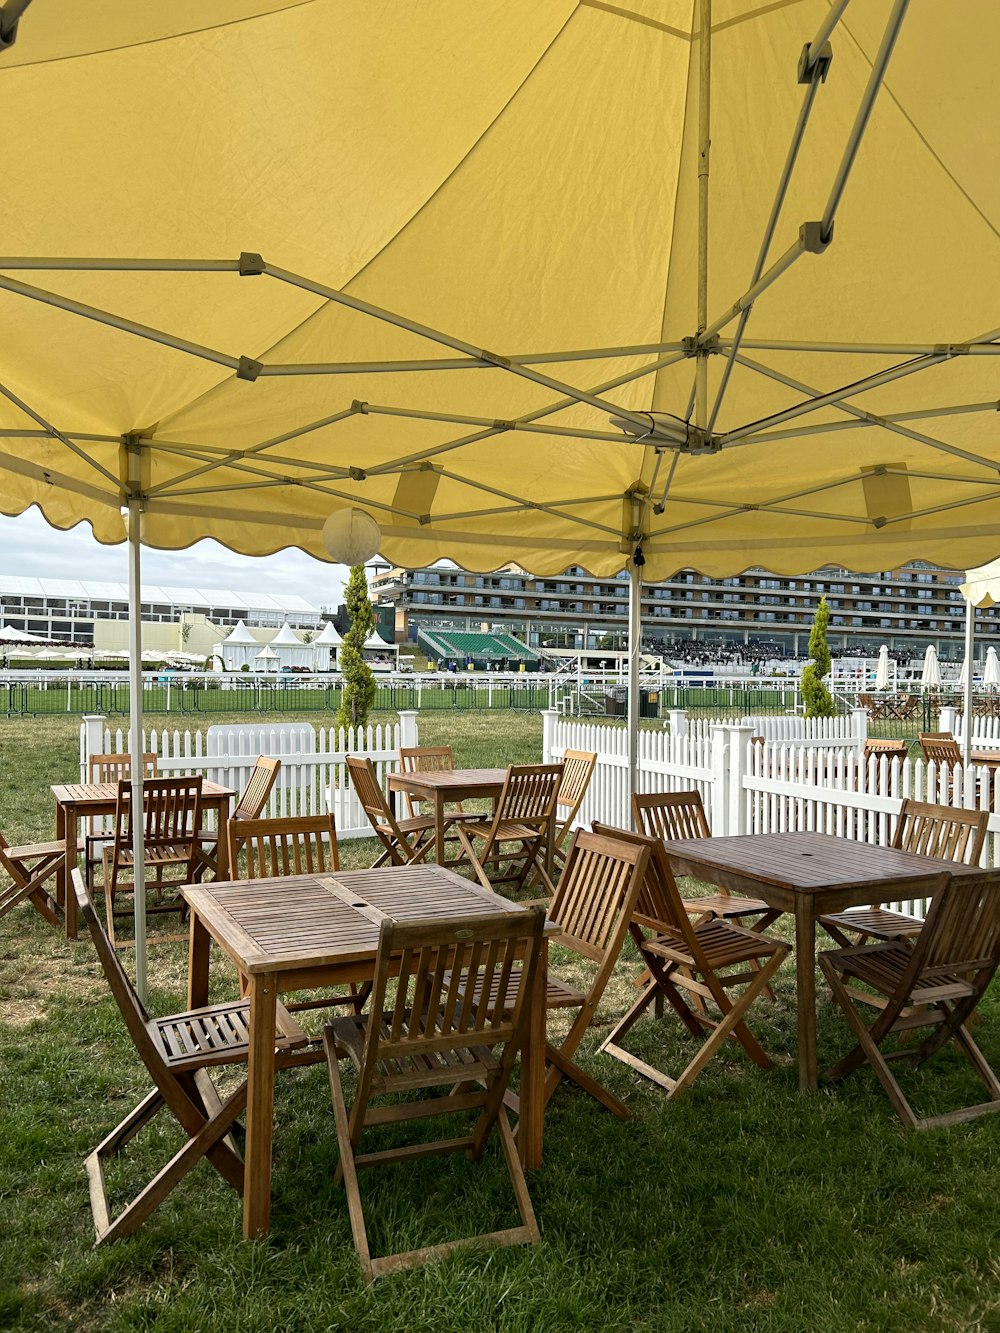 a group of wooden tables and chairs under a yellow umbrella